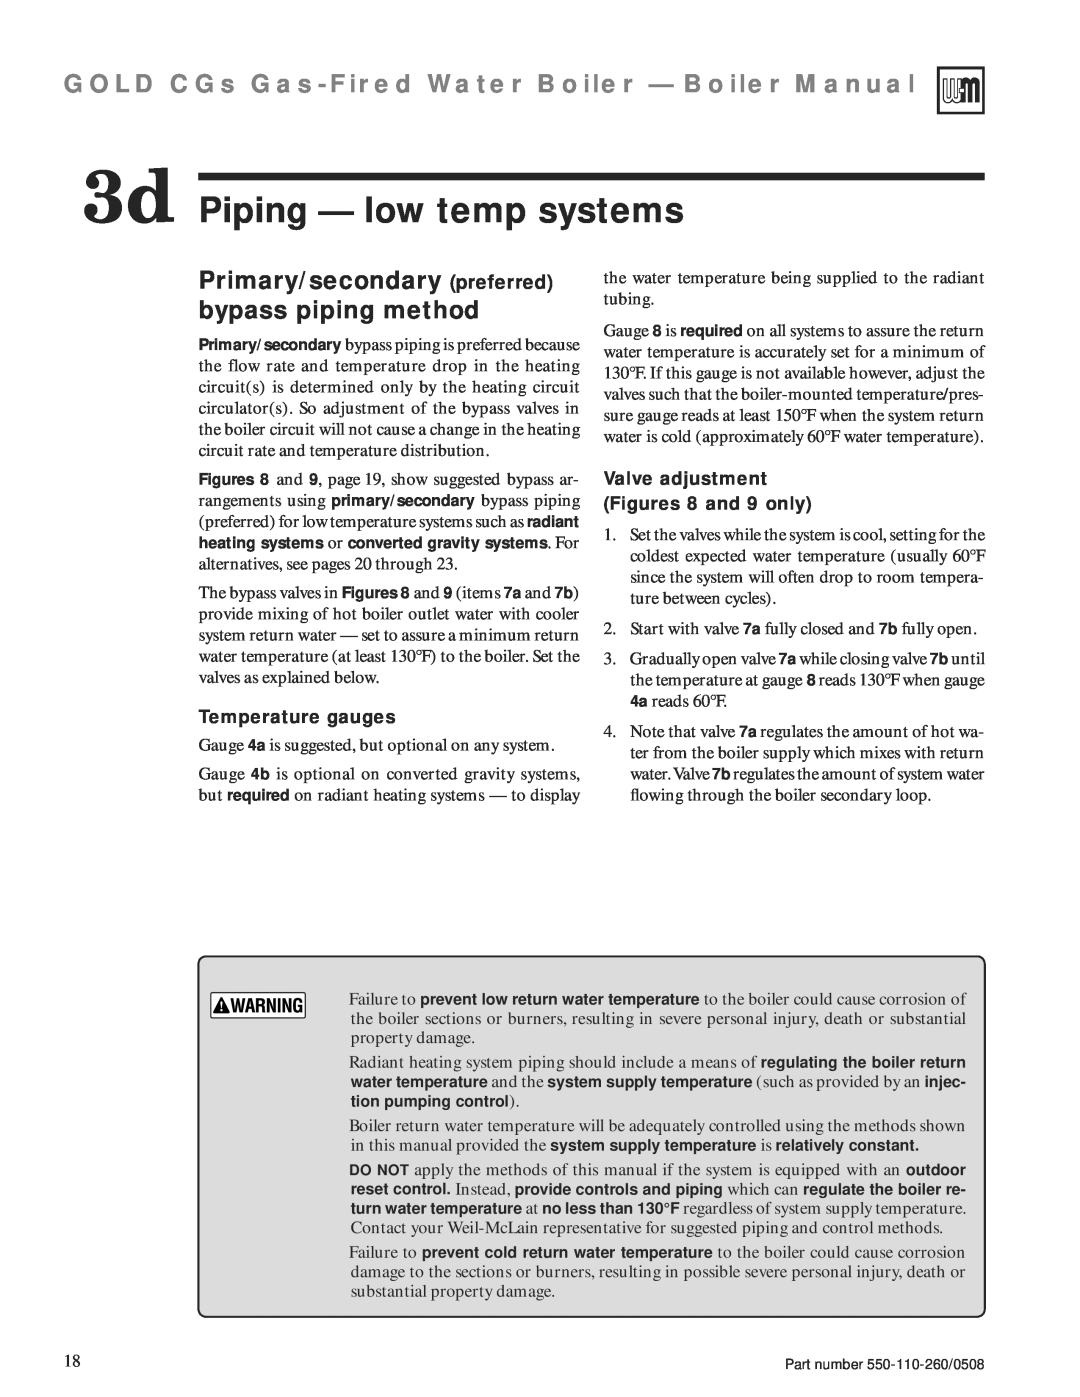 Weil-McLain 550-110-260/0508 manual 3d Piping — low temp systems, Primary/secondary preferred bypass piping method 